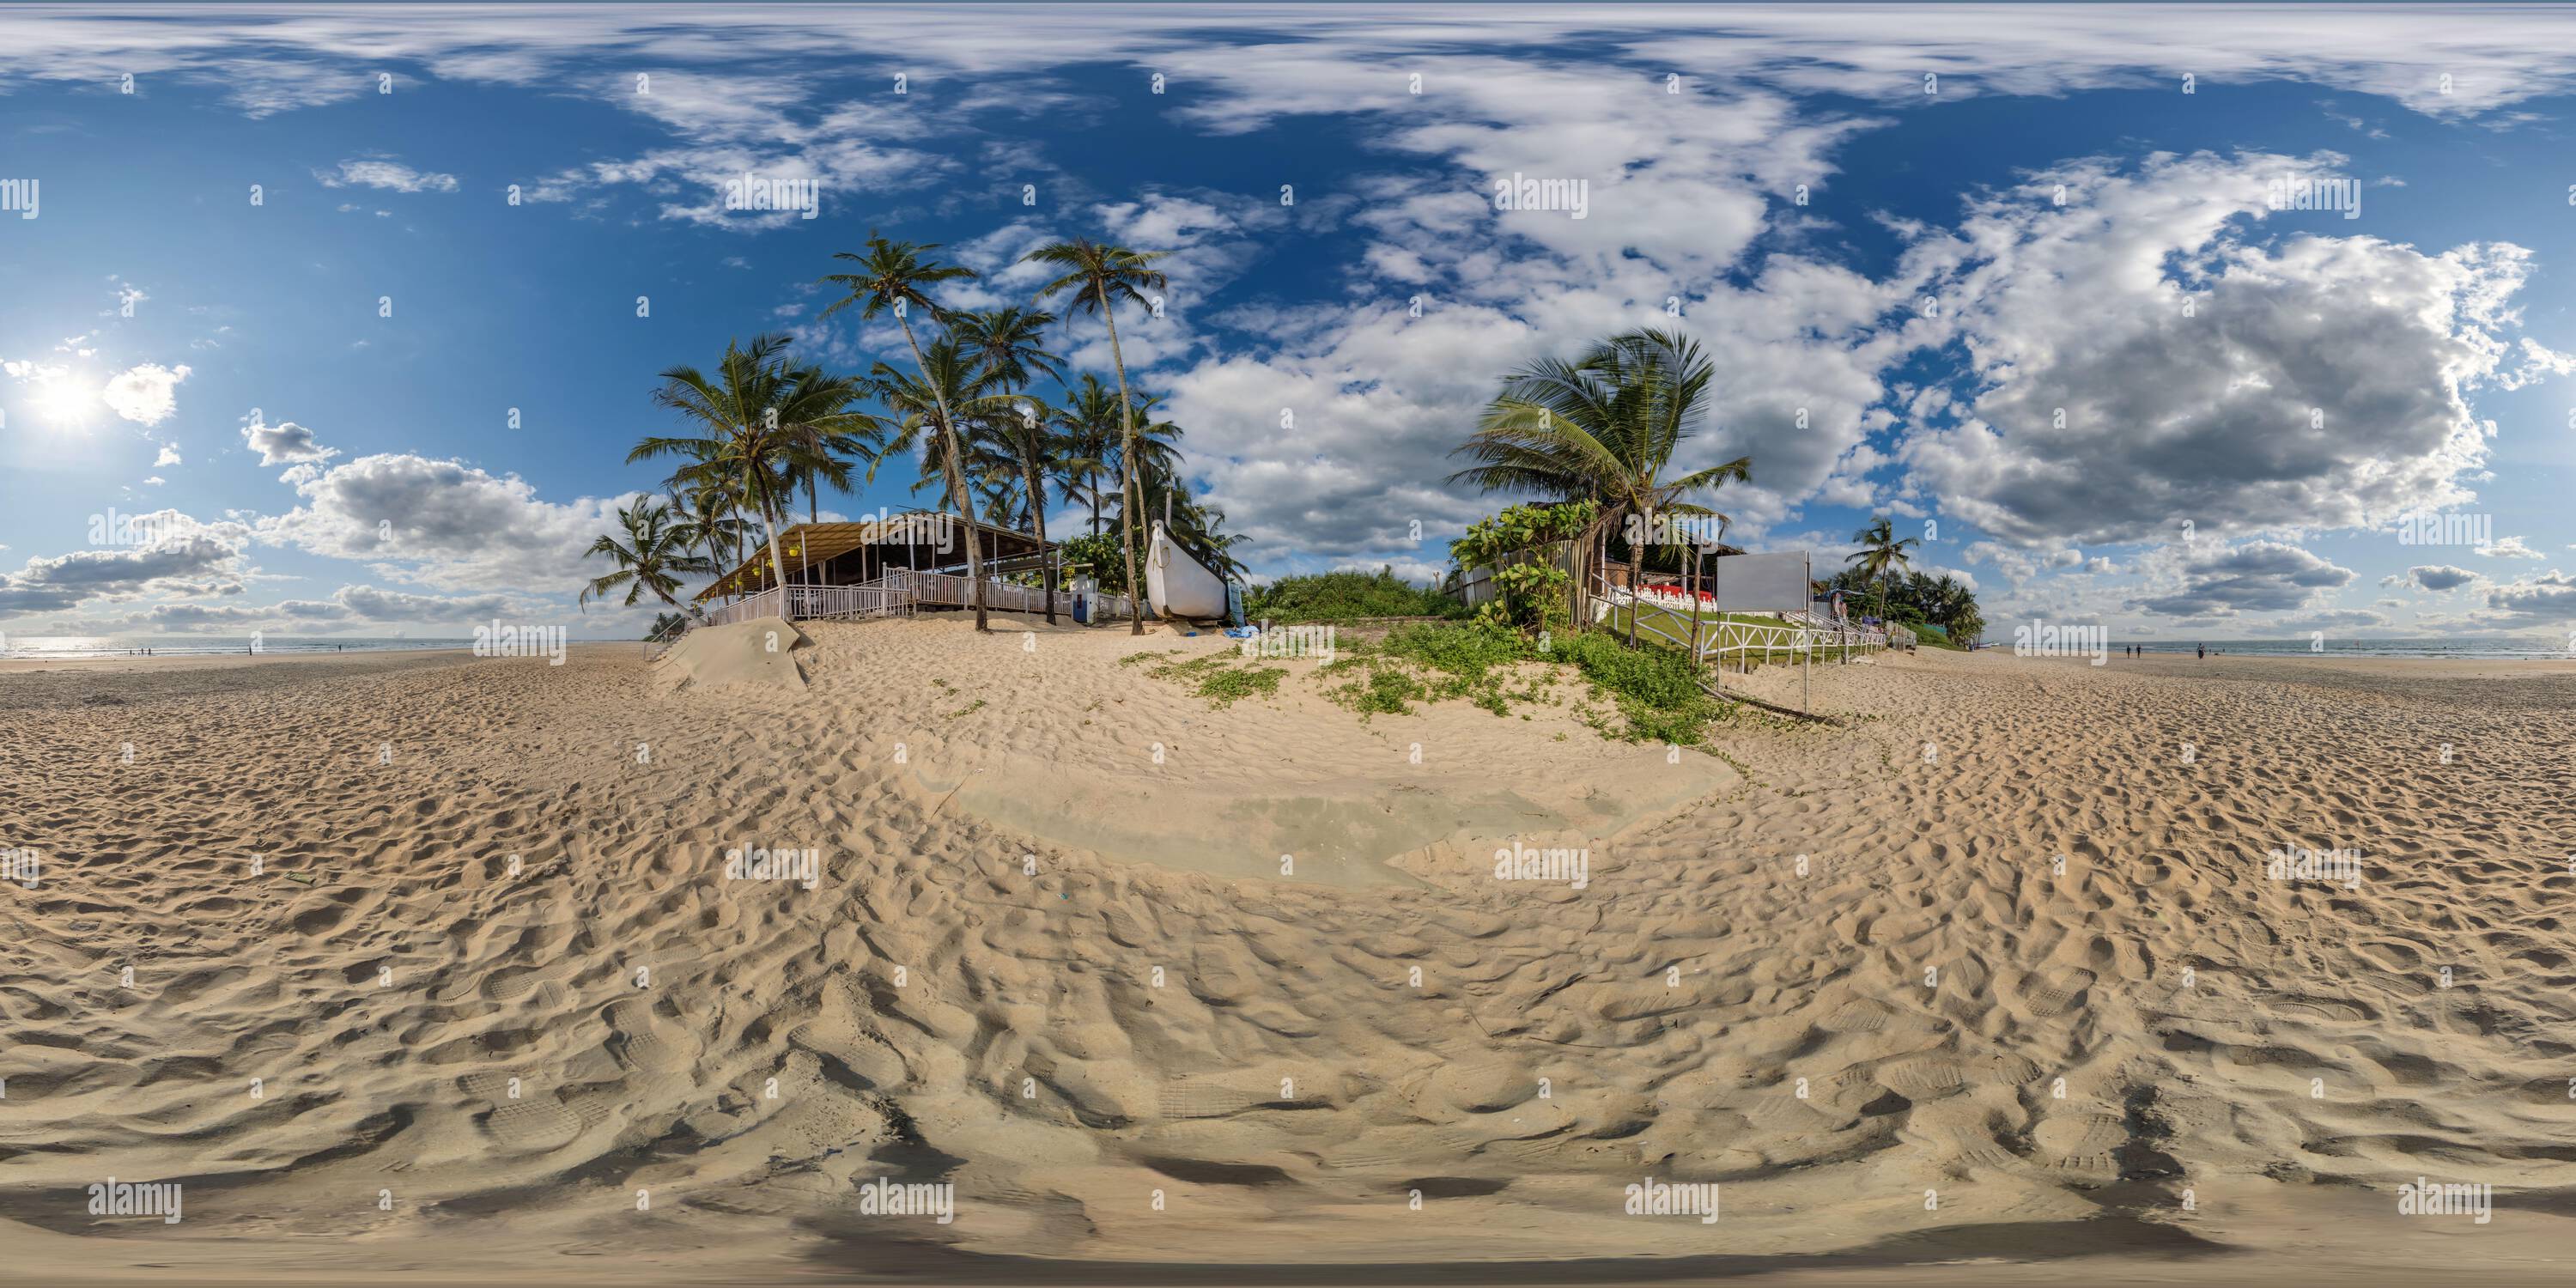 360 degree panoramic view of 360 hdri panorama with coconut trees on ocean coast near tropical shack or open air shack cafe on beach in equirectangular spherical seamless projecti